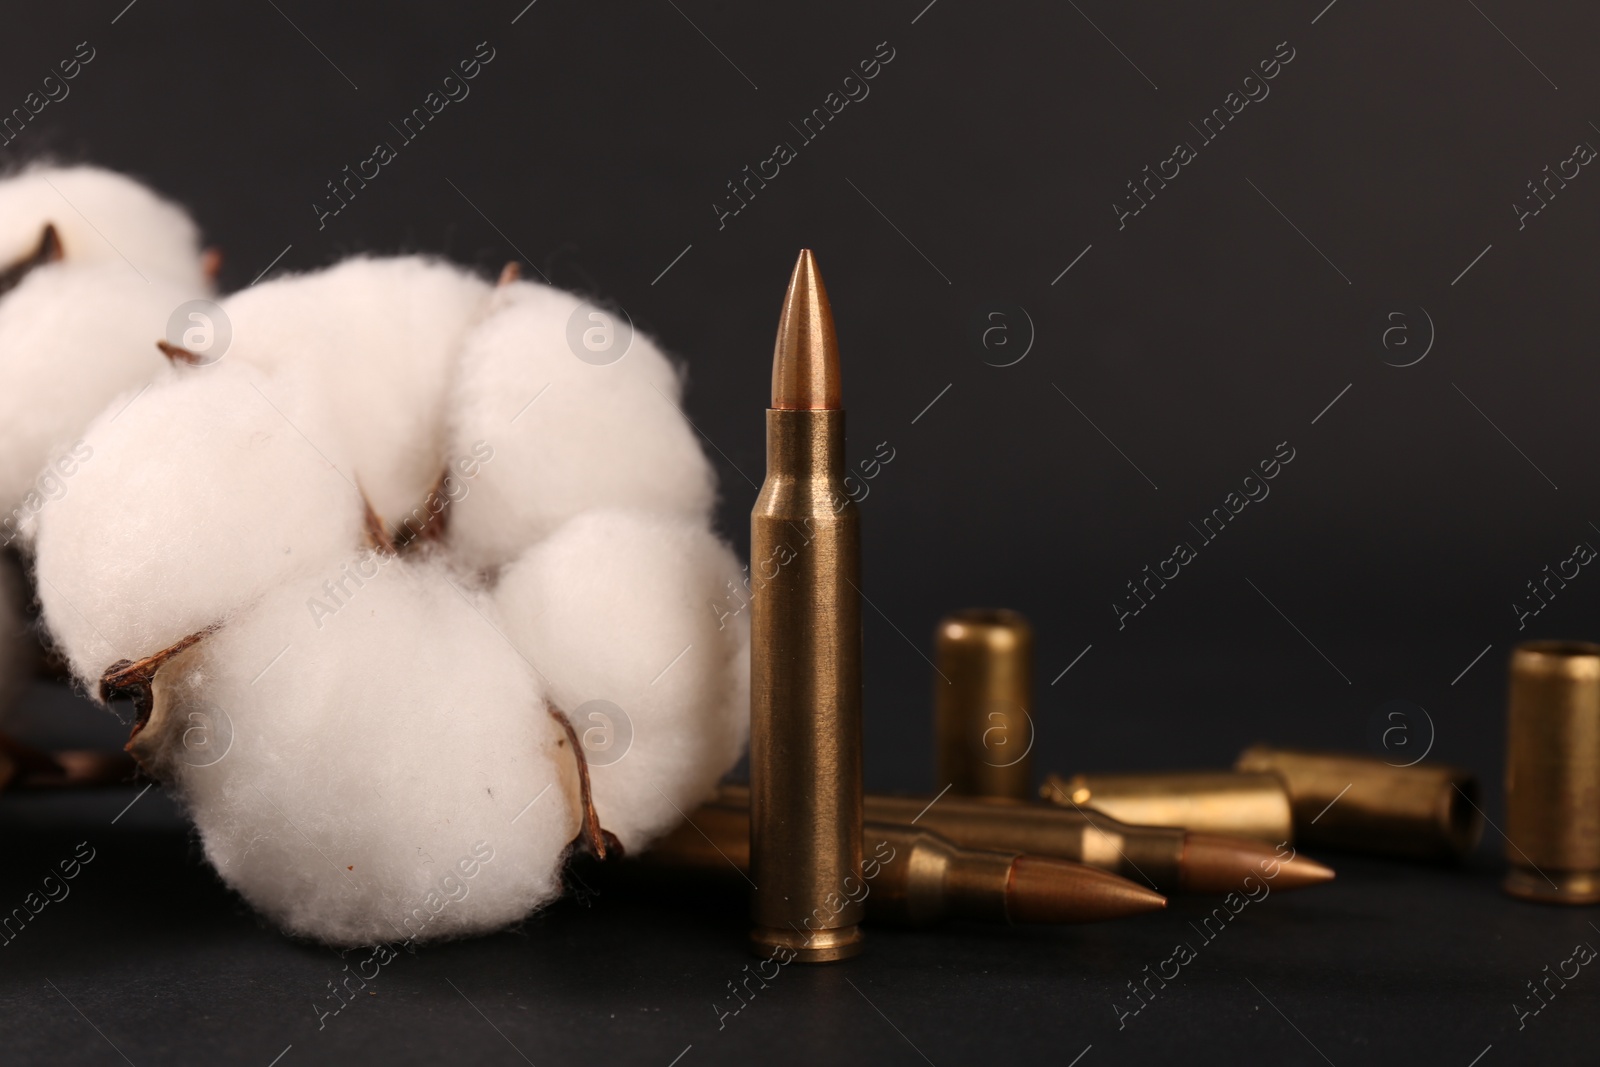 Photo of Bullets, cartridge cases and beautiful cotton flower on black background, closeup